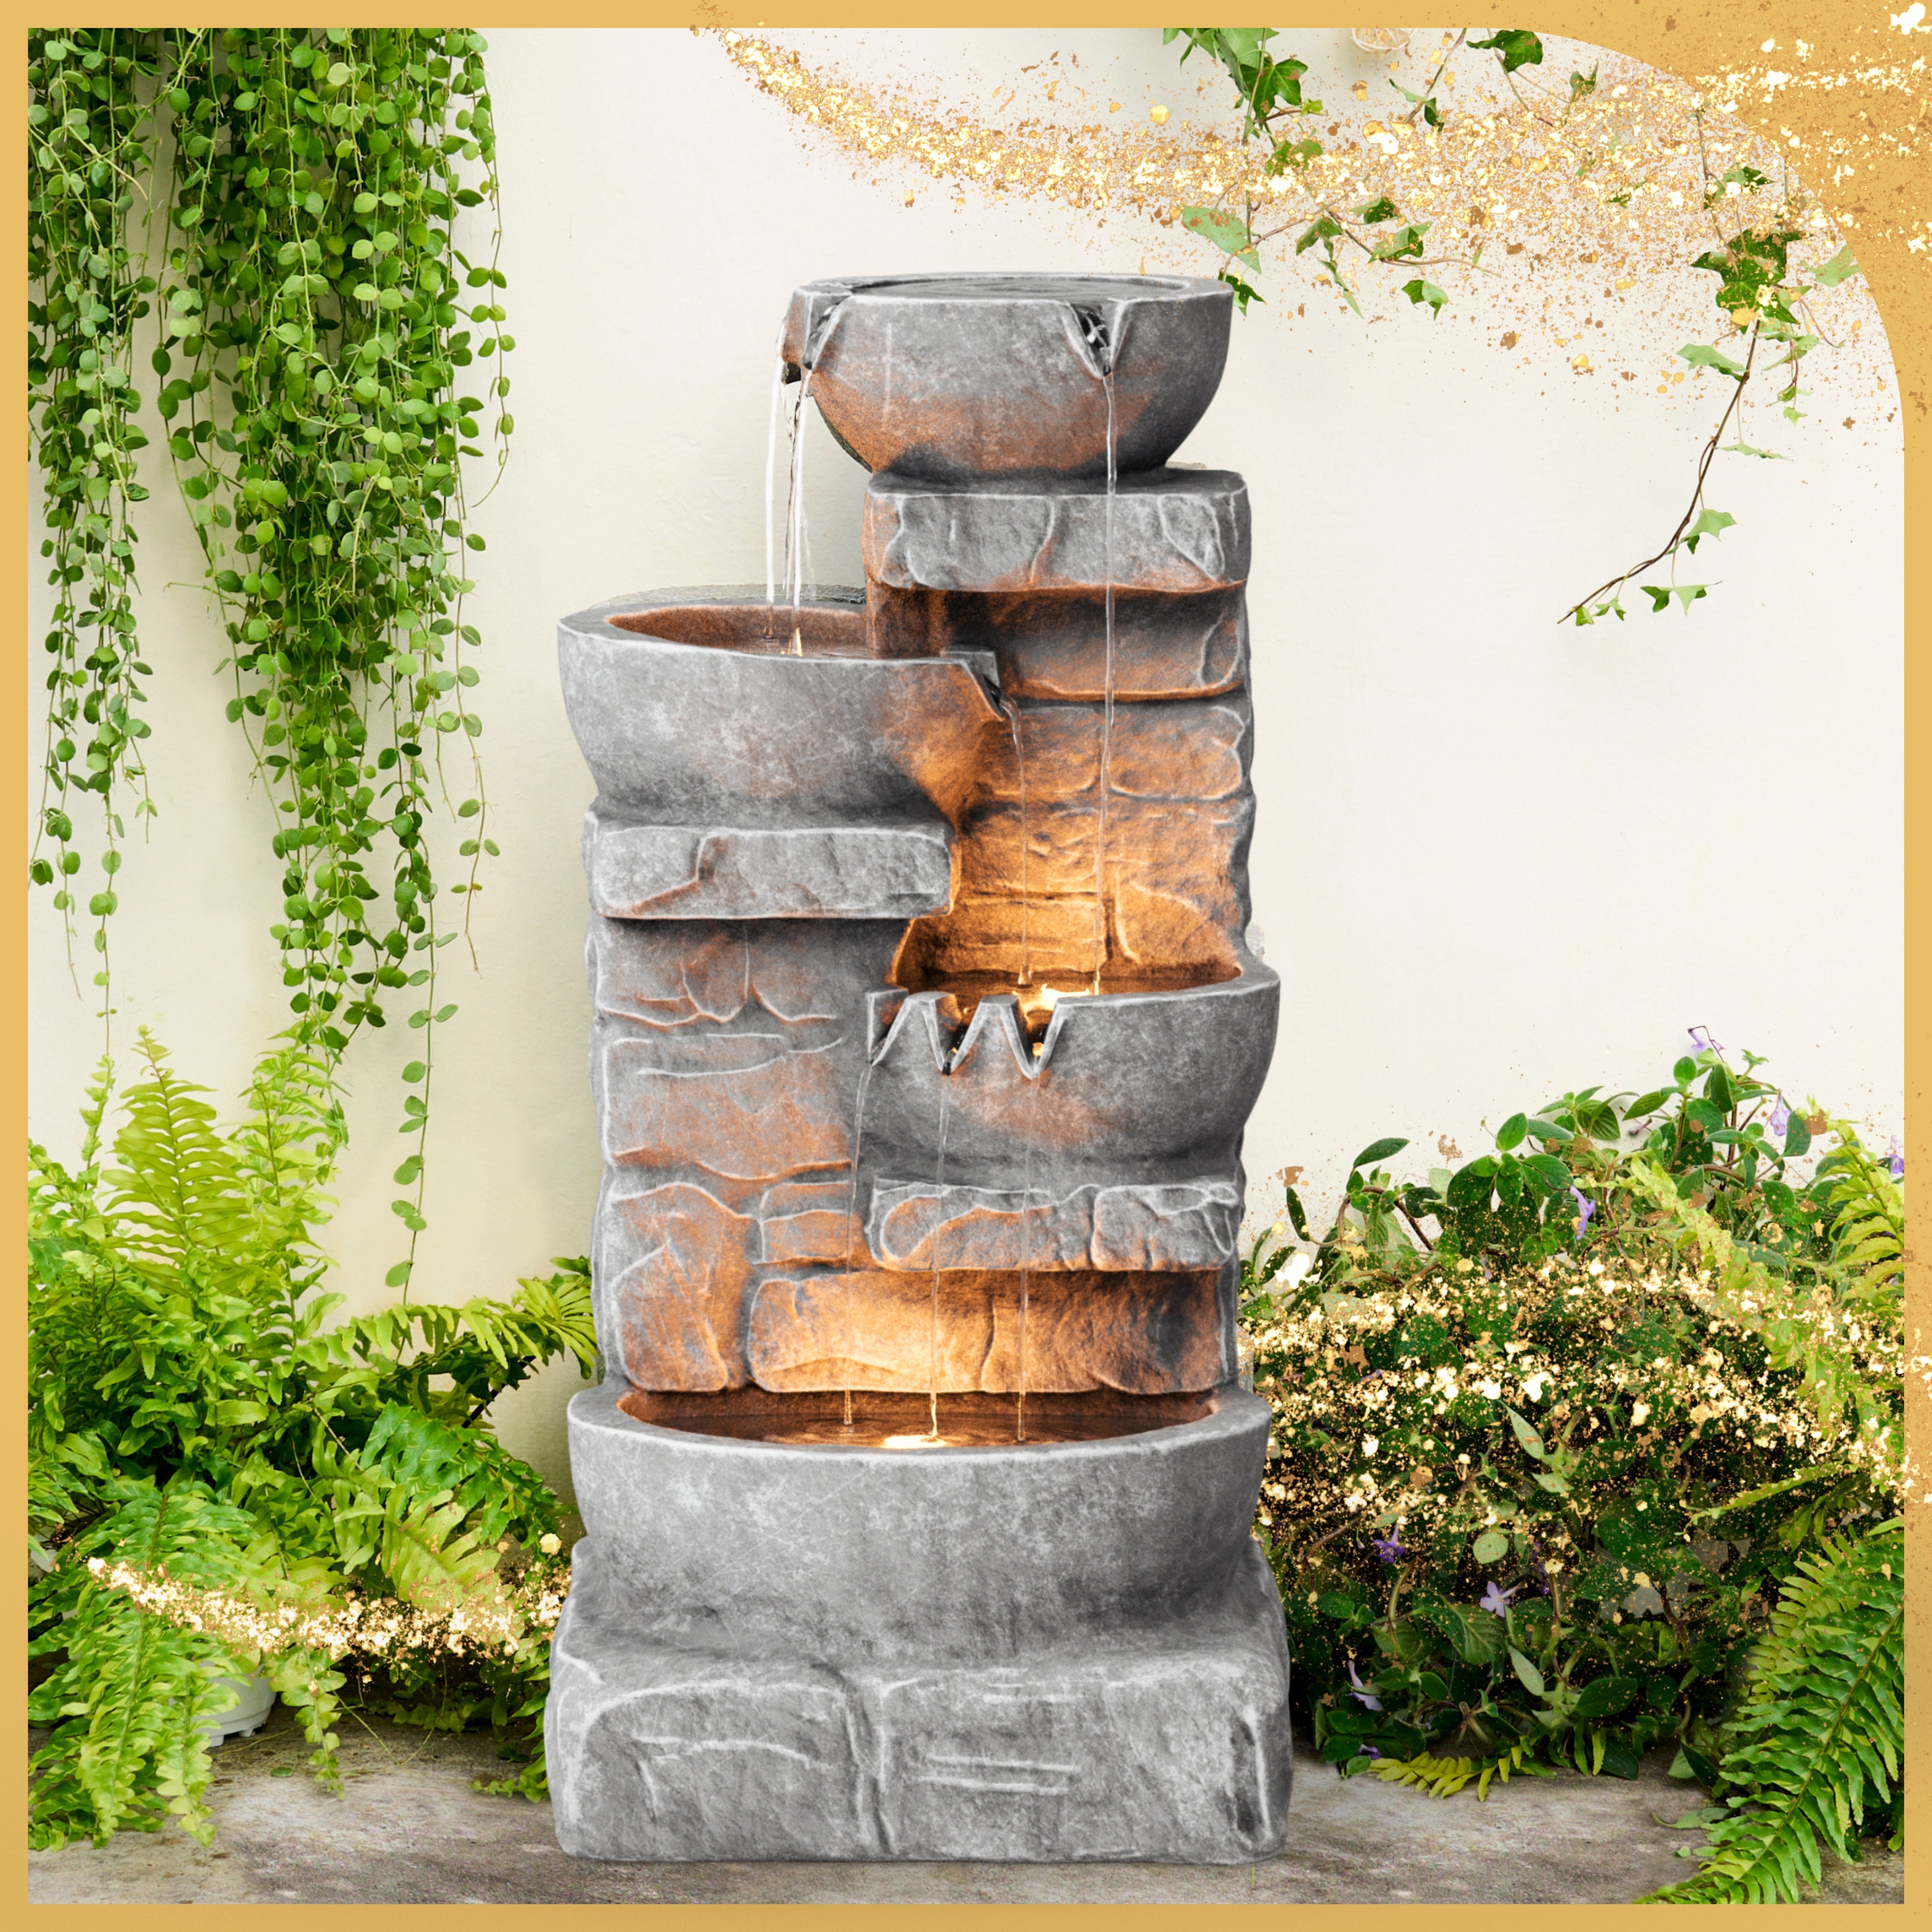 four bowls are stacked in faux stone, each trickling down to the next with a flow of water in an outdoor garden of ferns